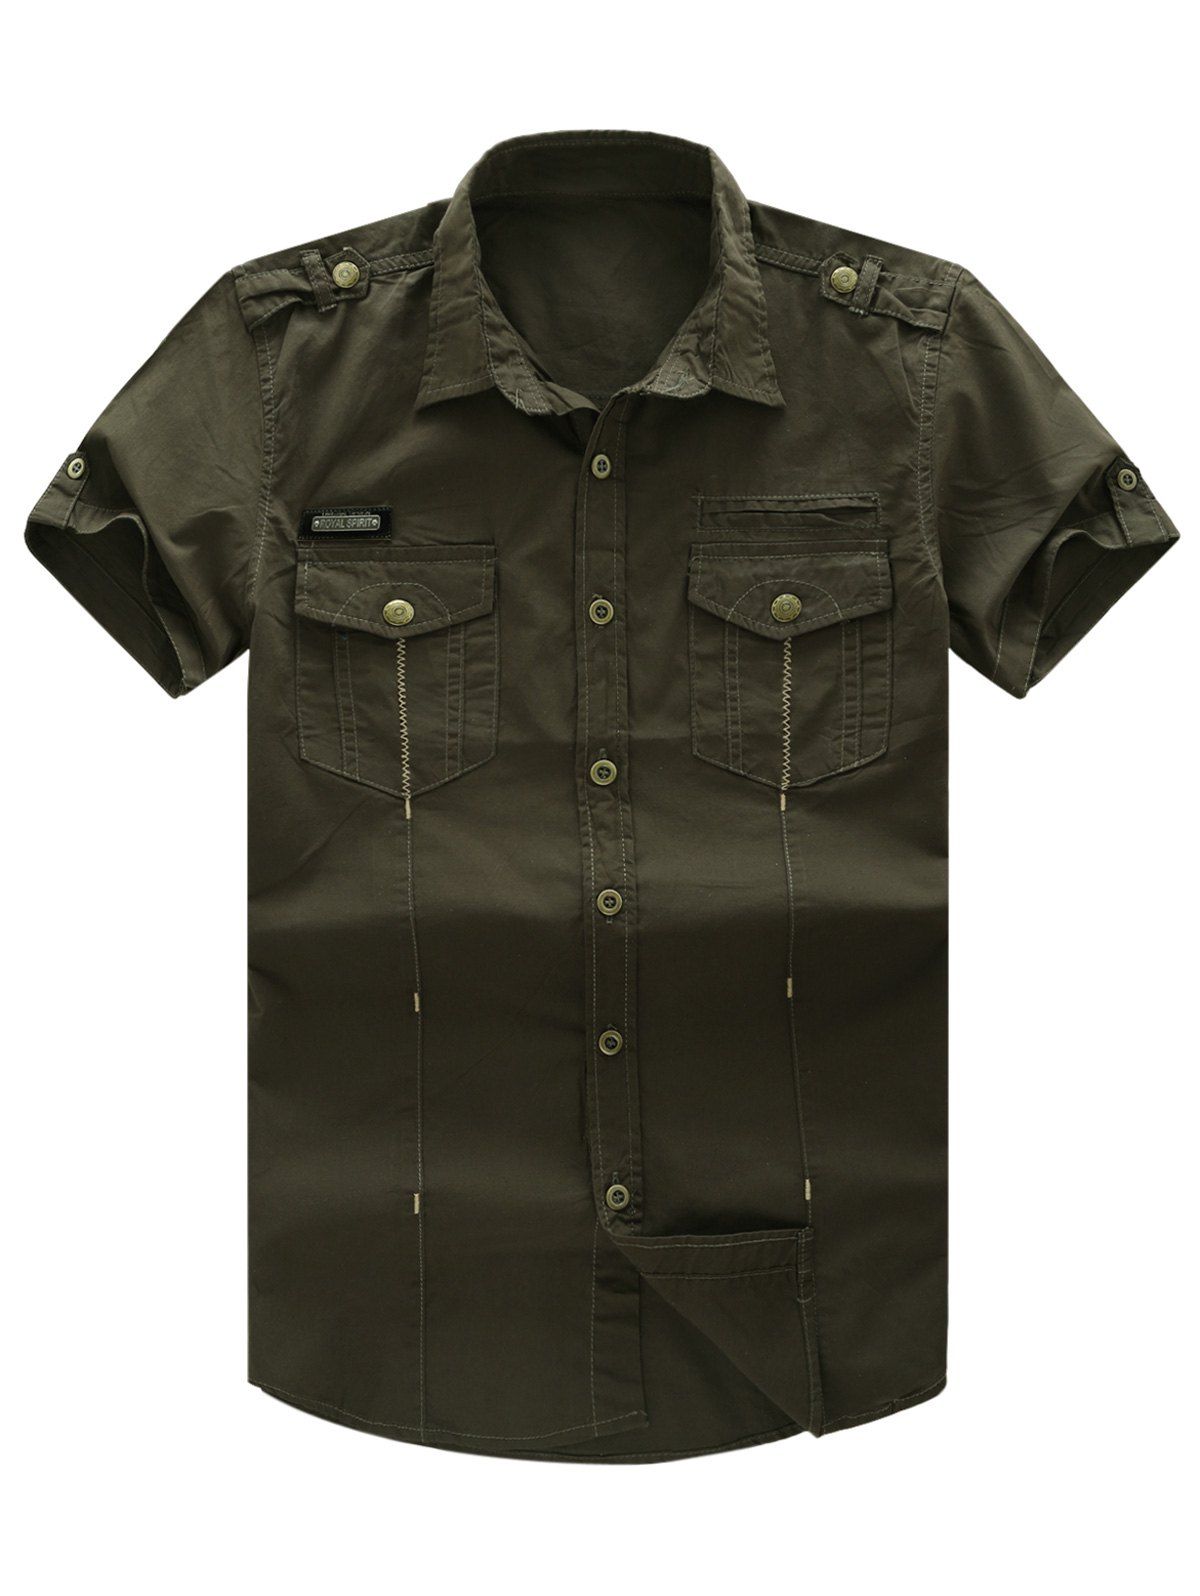 [41% OFF] 2021 Short Sleeve Pocket Military Shirt With Epaulet In ARMY ...